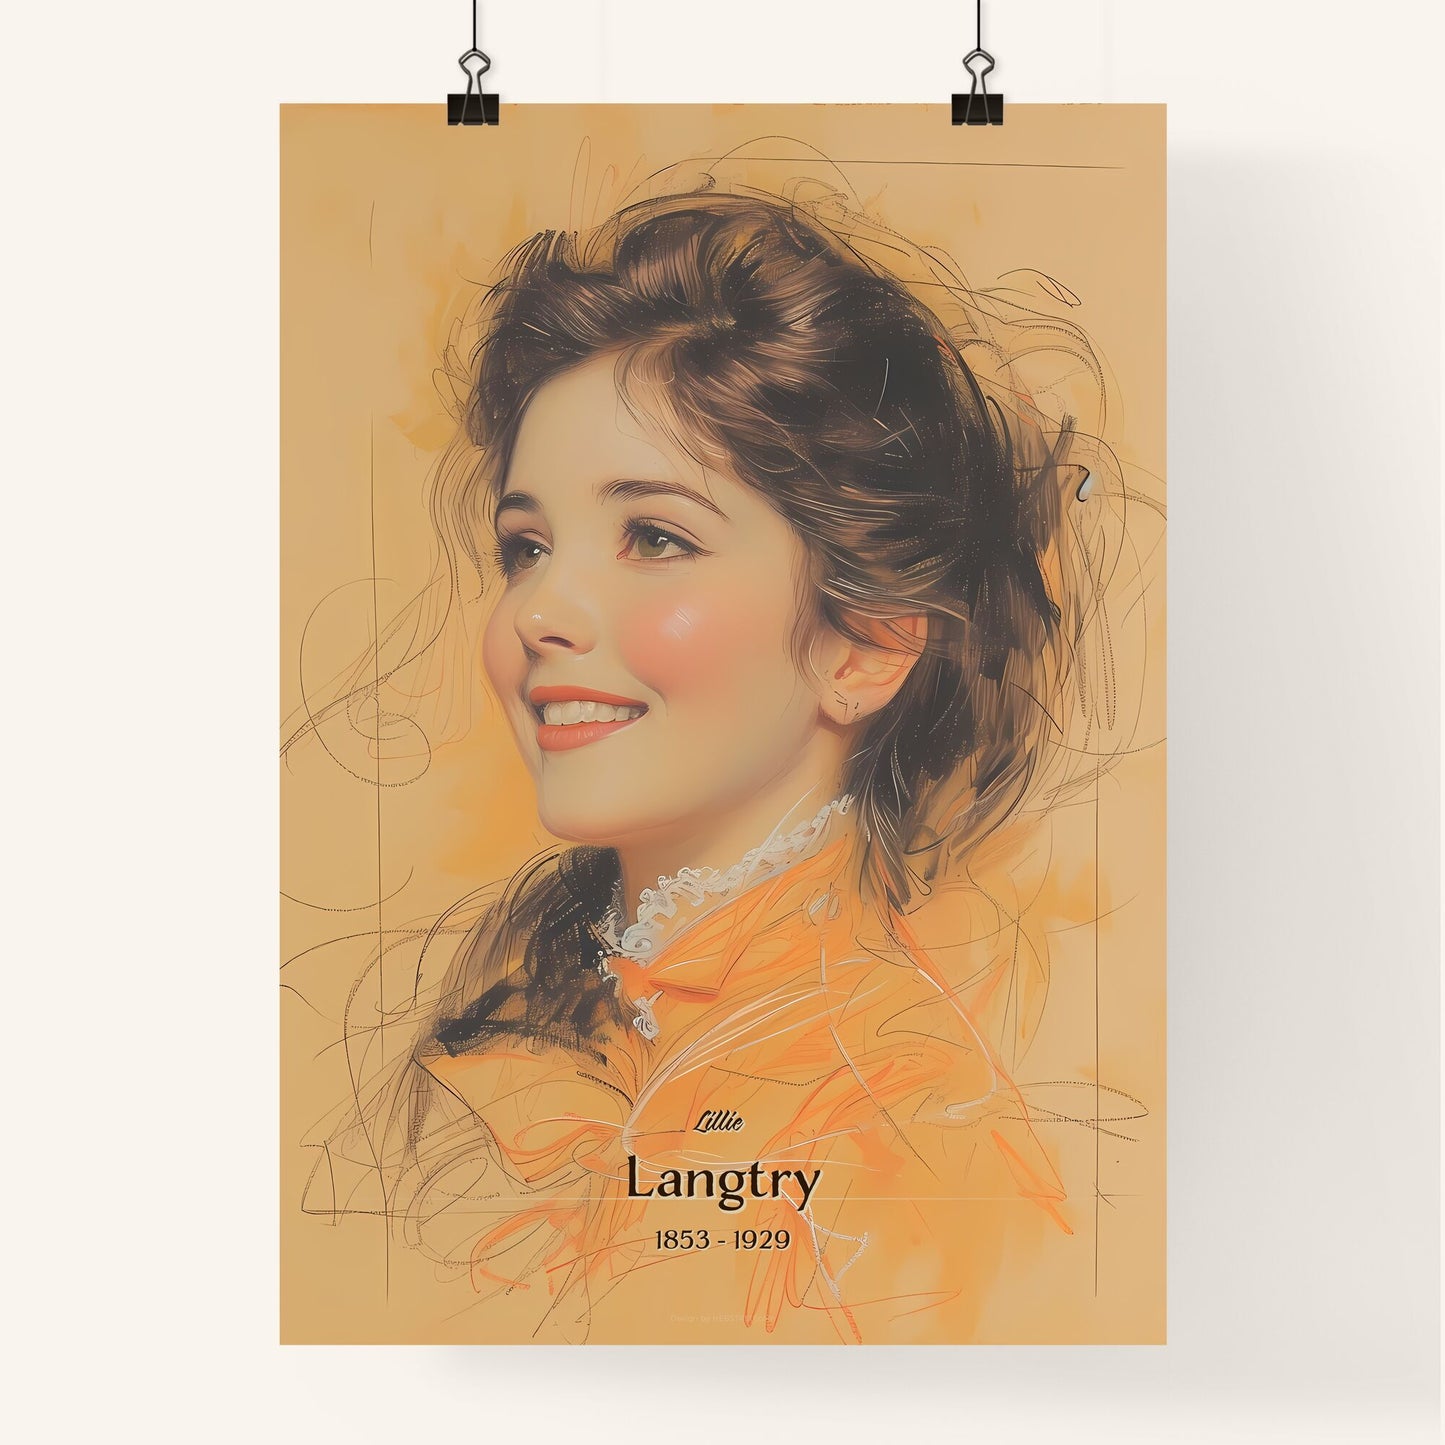 Lillie, Langtry, 1853 - 1929, A Poster of a woman smiling with a yellow shirt Default Title